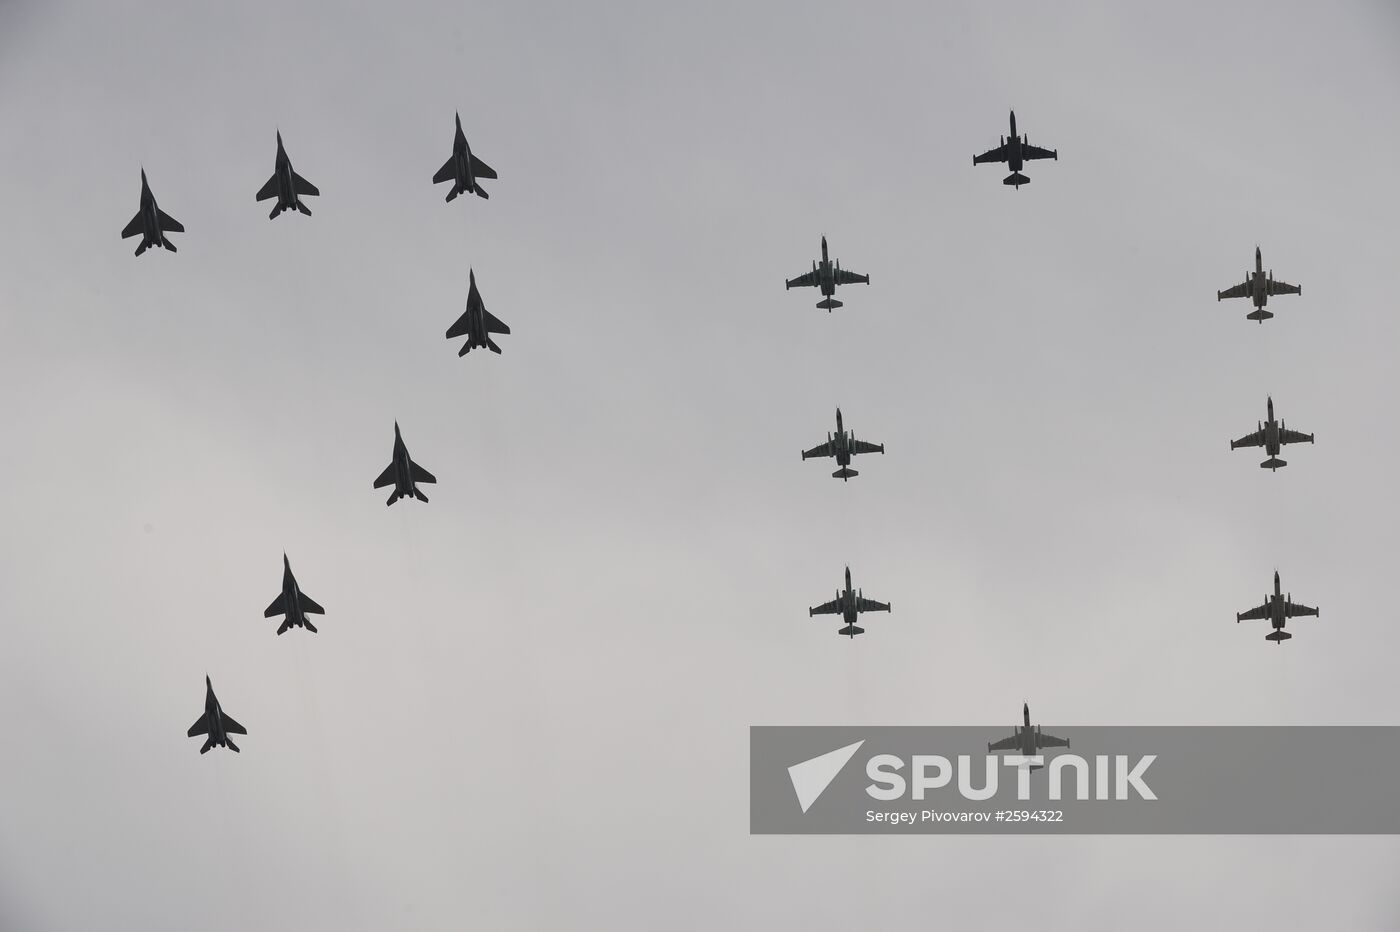 Southern Military District pilots prepare for Victory parade in Moscow